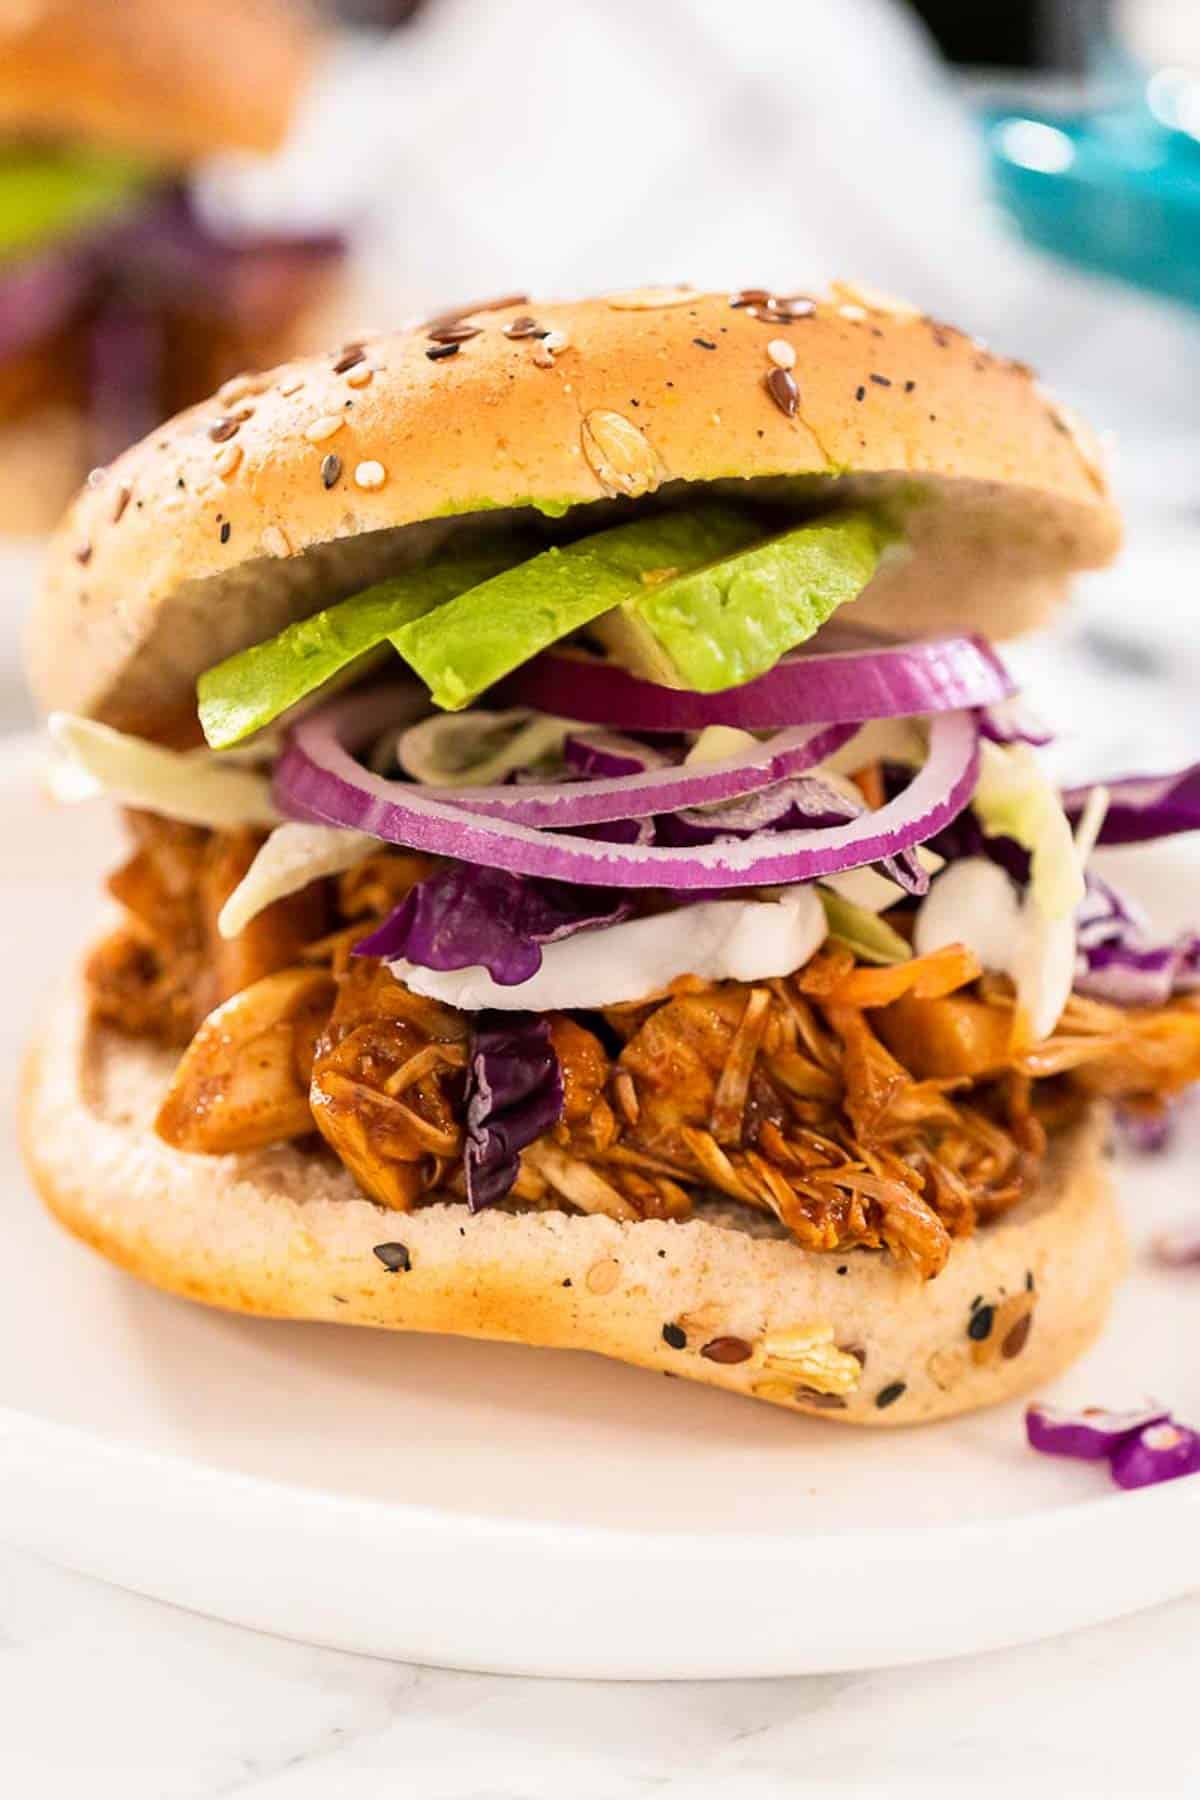 A stacked jackfruit burger, topped with a bun.